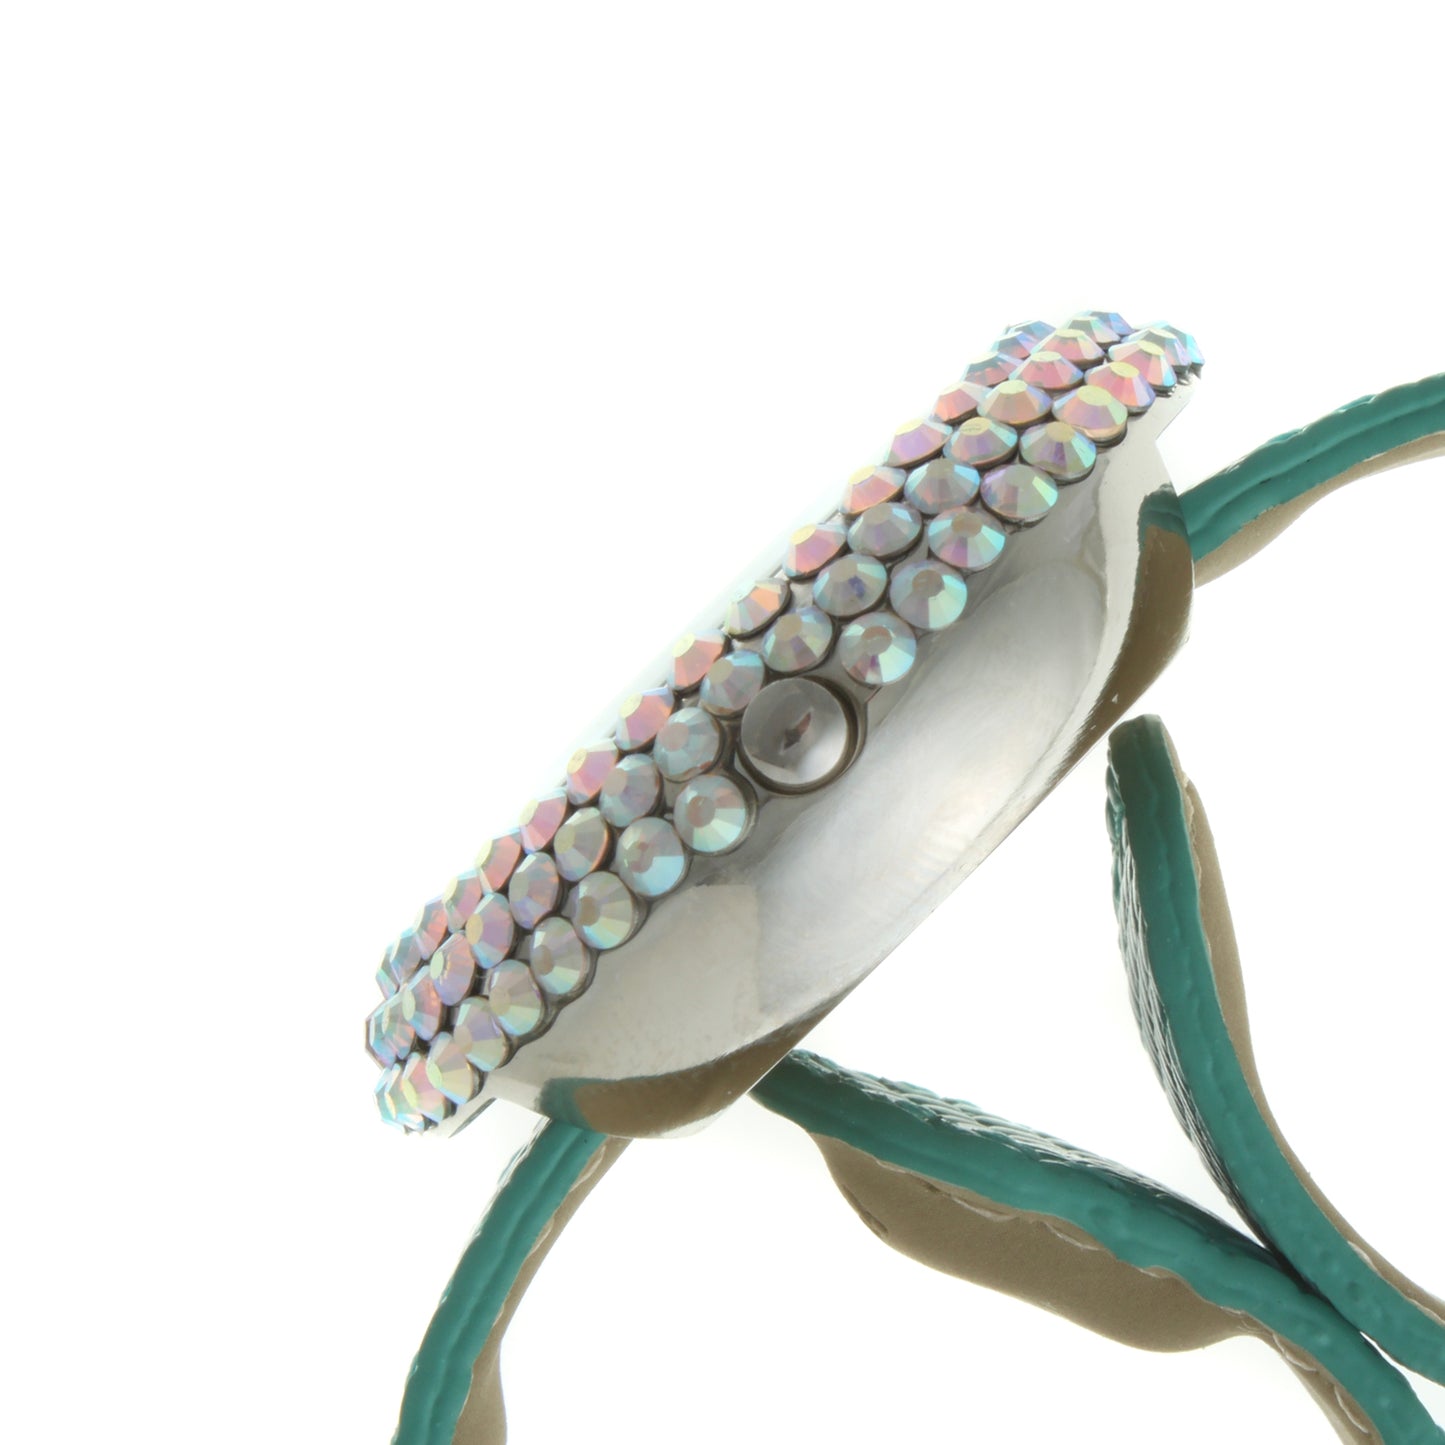 TKO Crystal Slapper with Leather Band - Turquoise